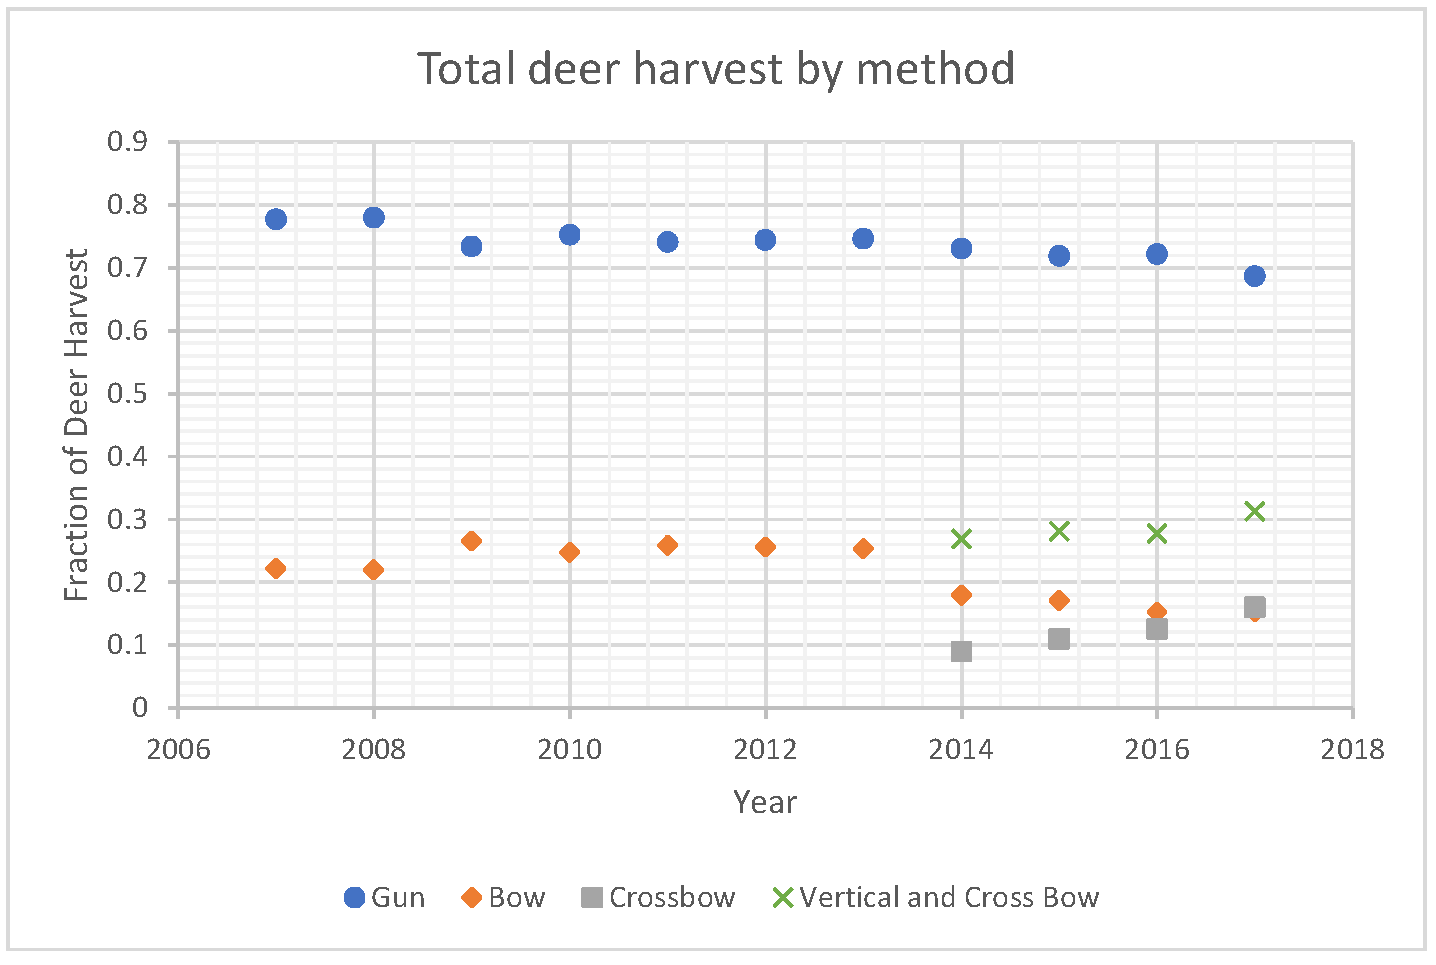 Total deer harvested in Wisconsin from 2007 to 2017.  The data is broken down by harvest method.  About 70% of deer are harvested by gun.  The other 30% is harvested by vertical or cross bow.